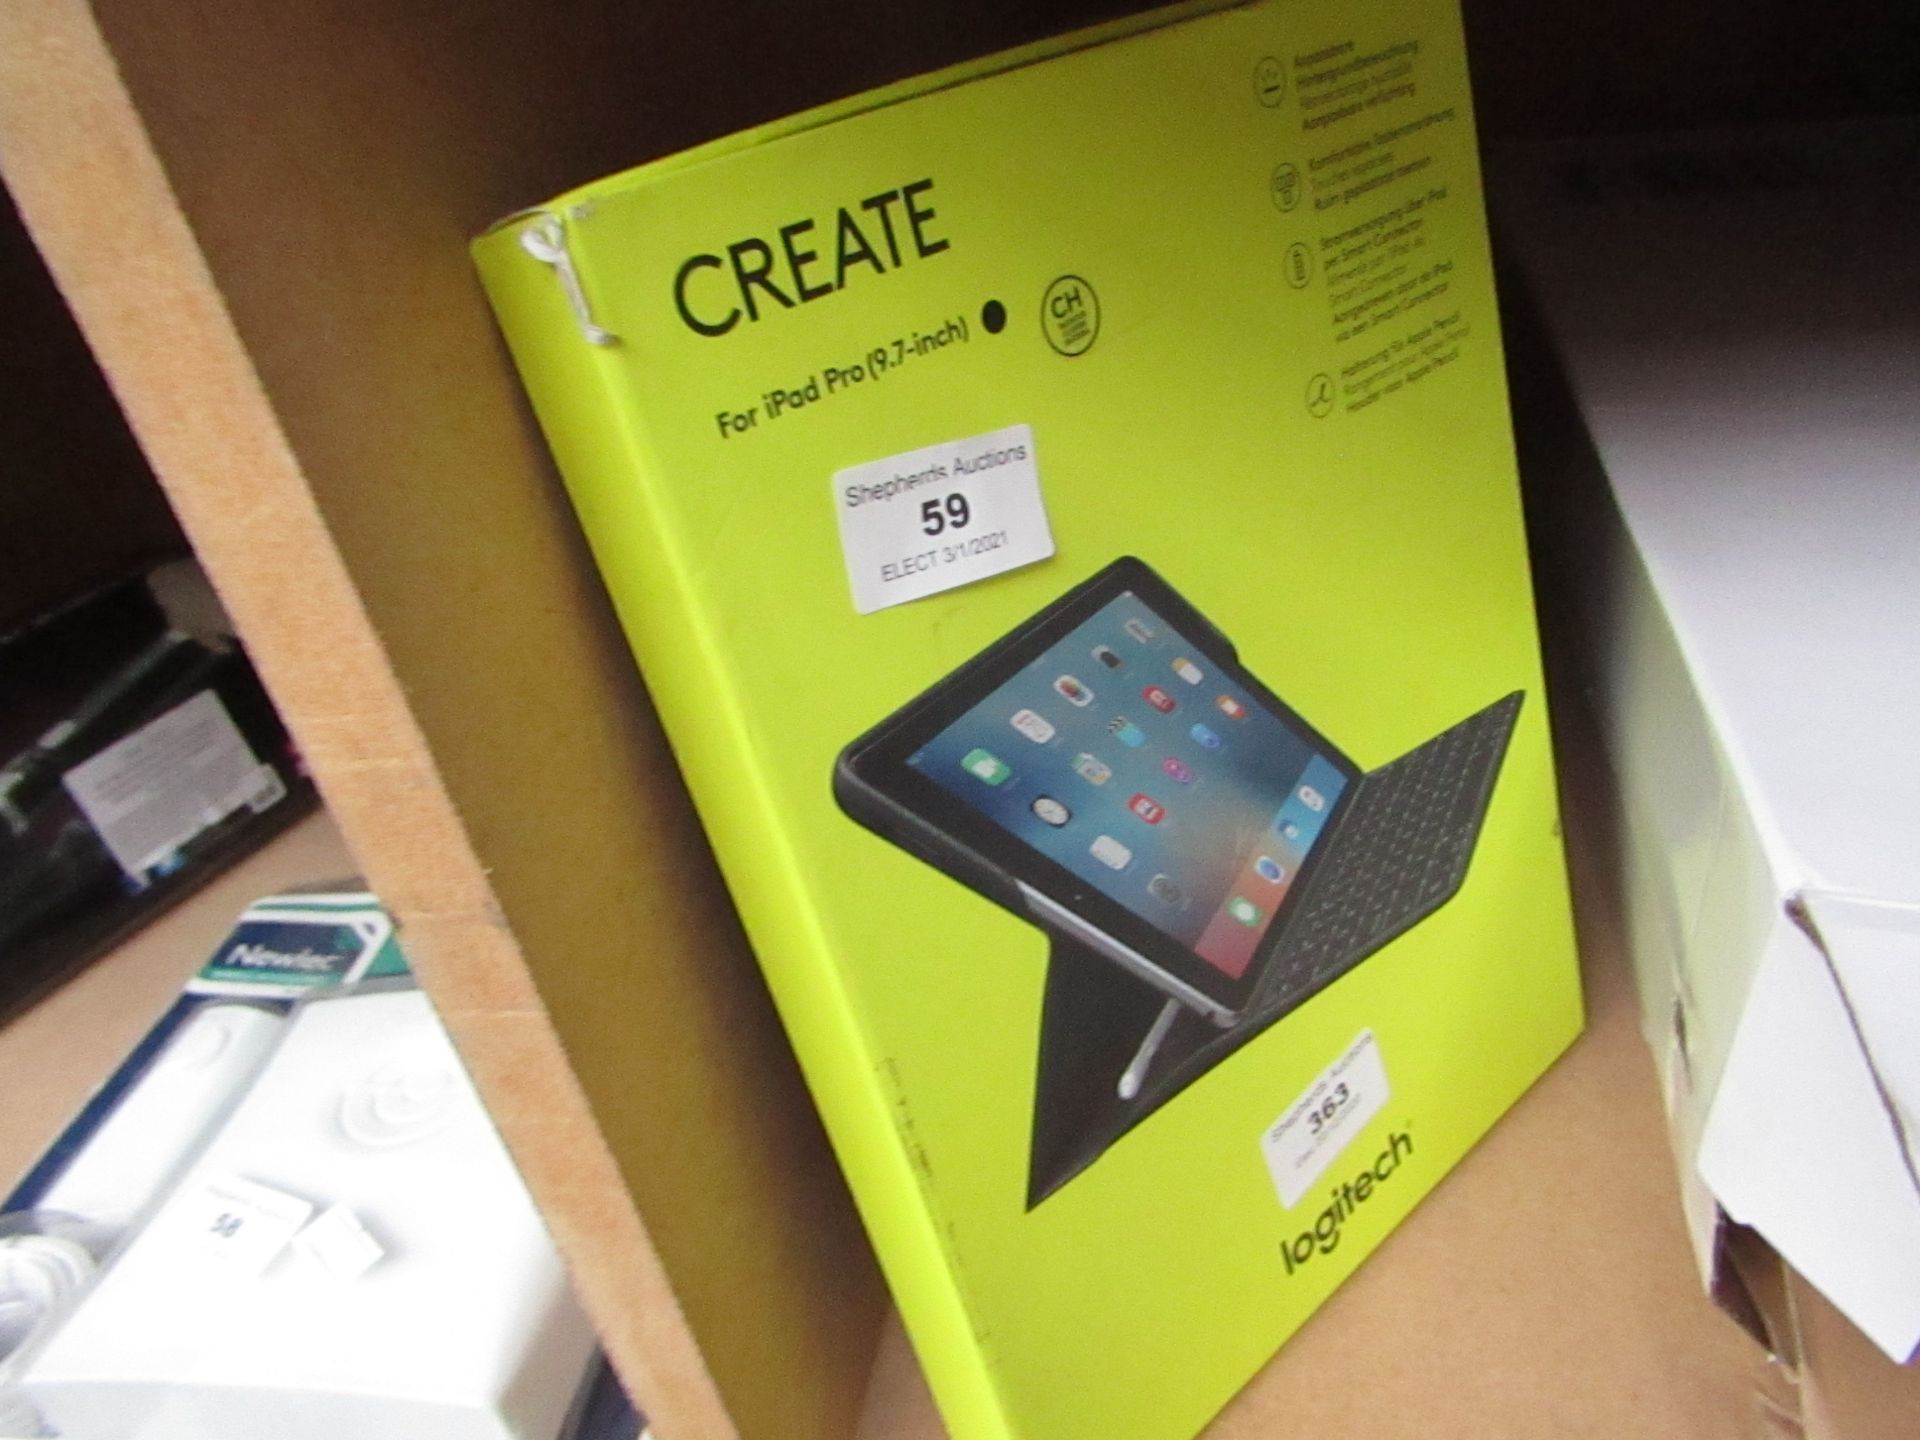 Logitech Create keyboard and case for iPad 9.7", unchecked and boxed.